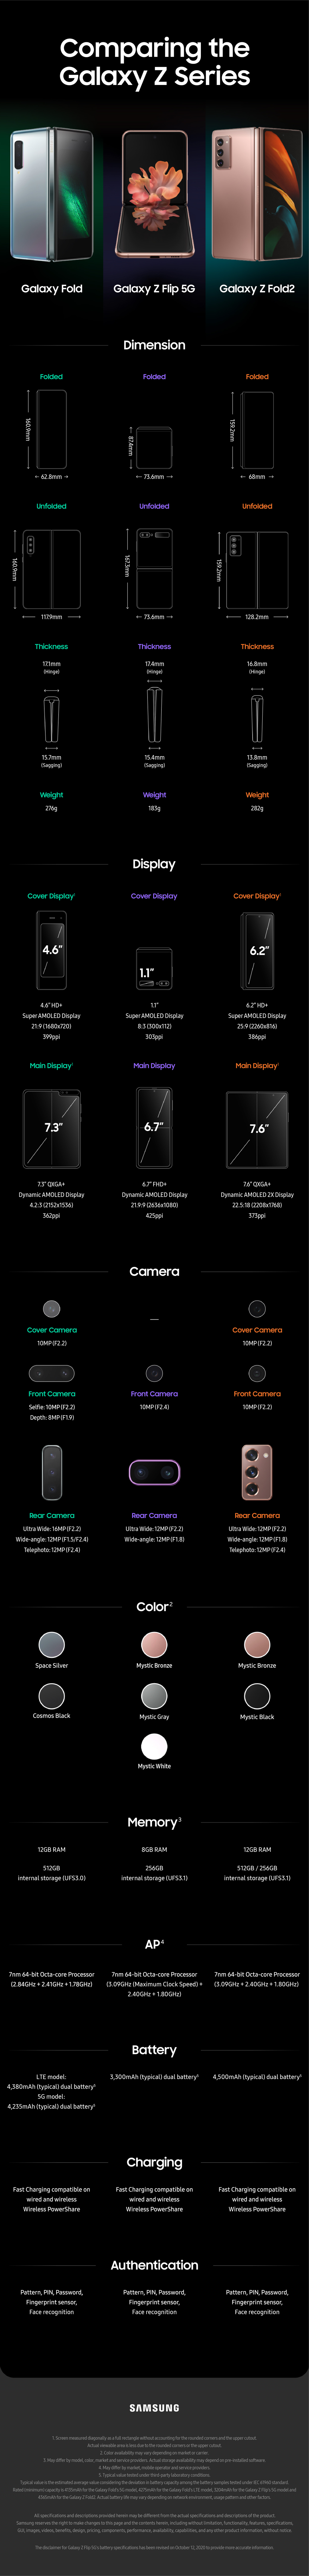 Galaxy Z Series Specification Comparison Infographic